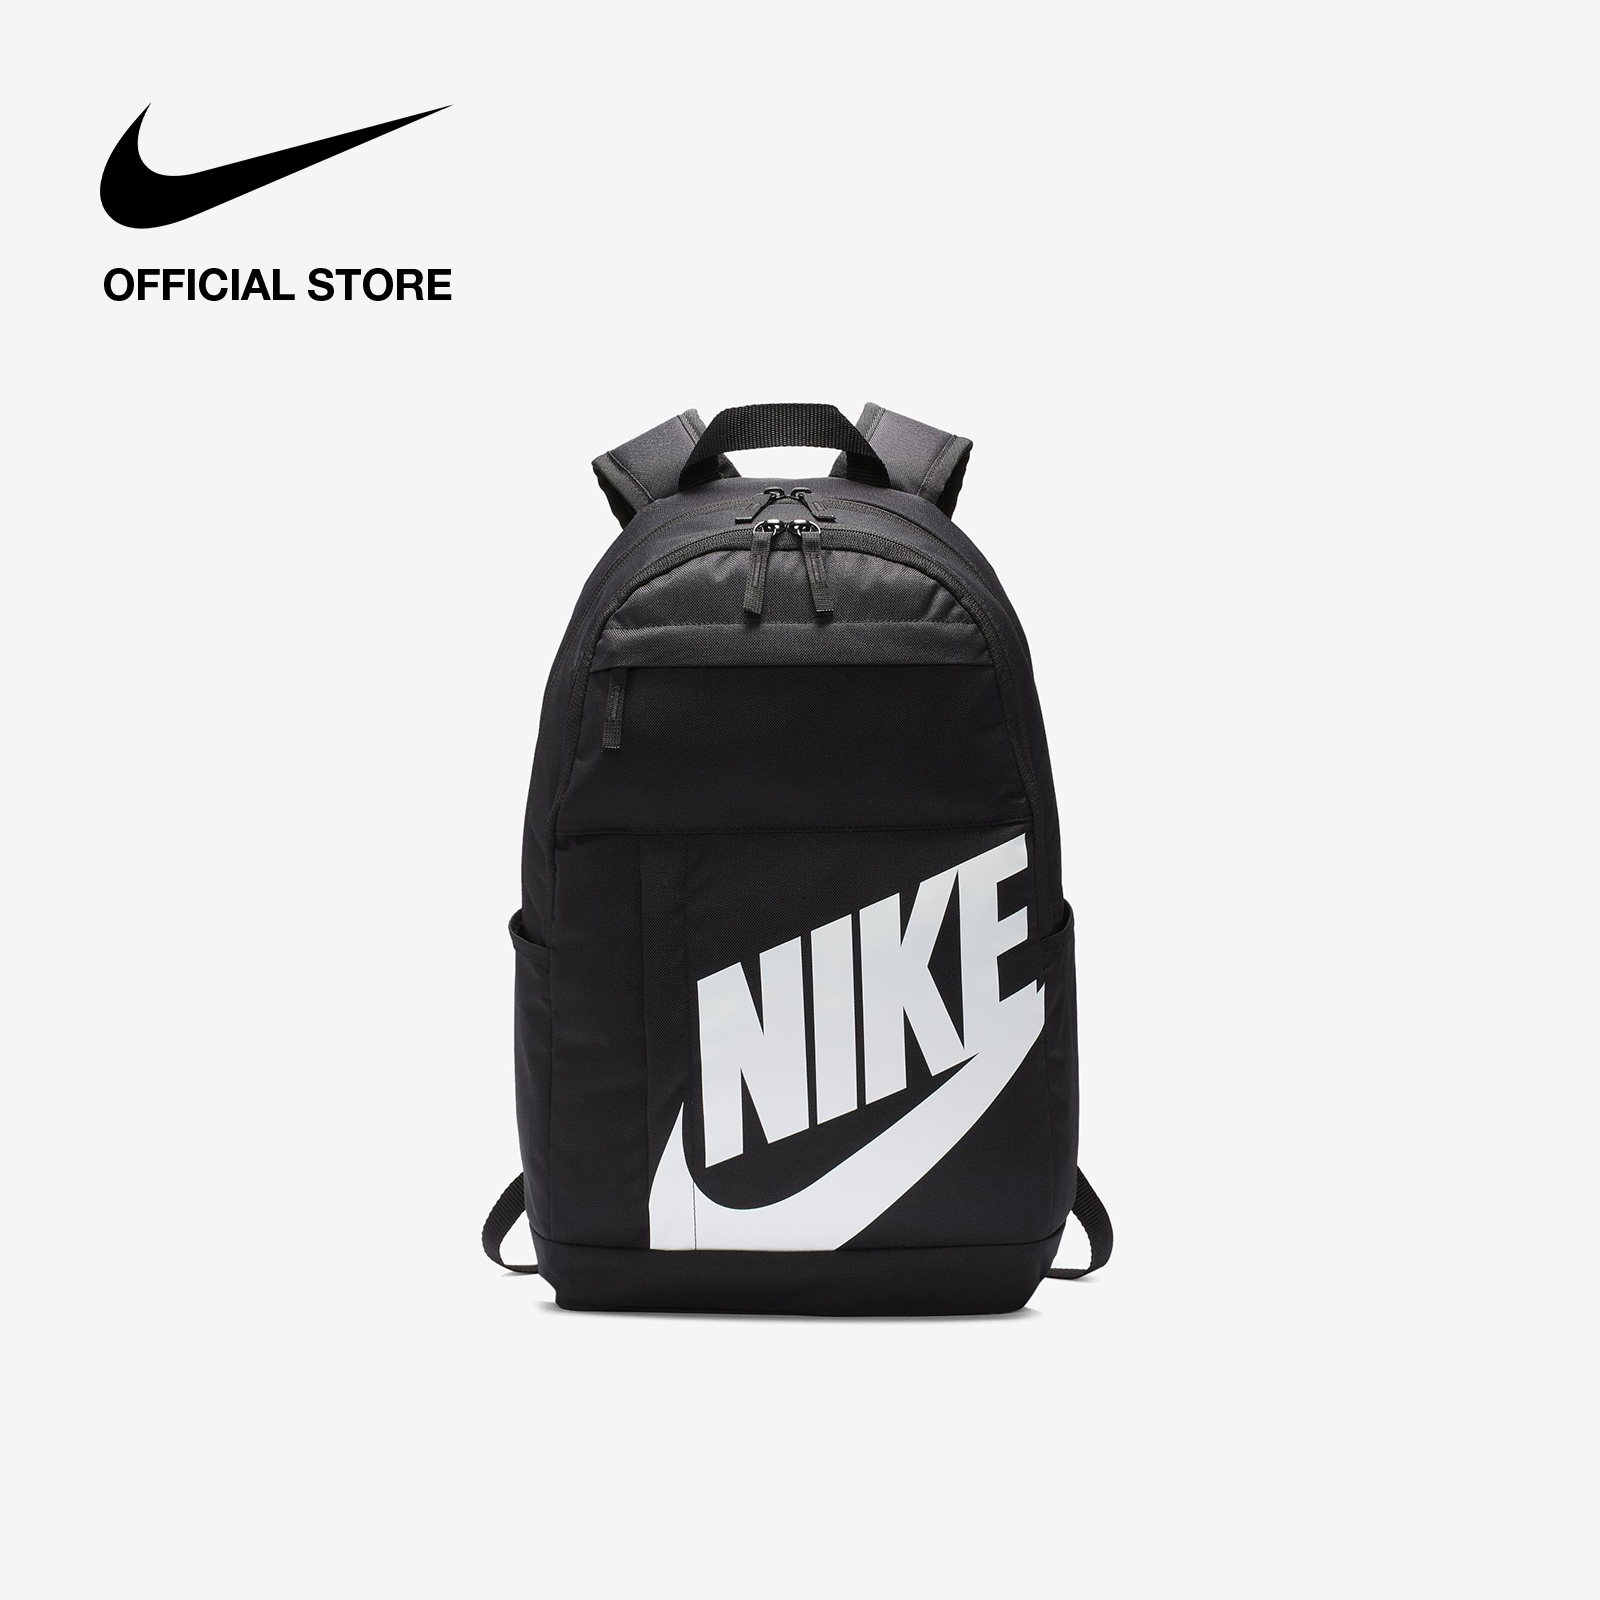 Buy Nike Bags and Travel Online | lazada.sg